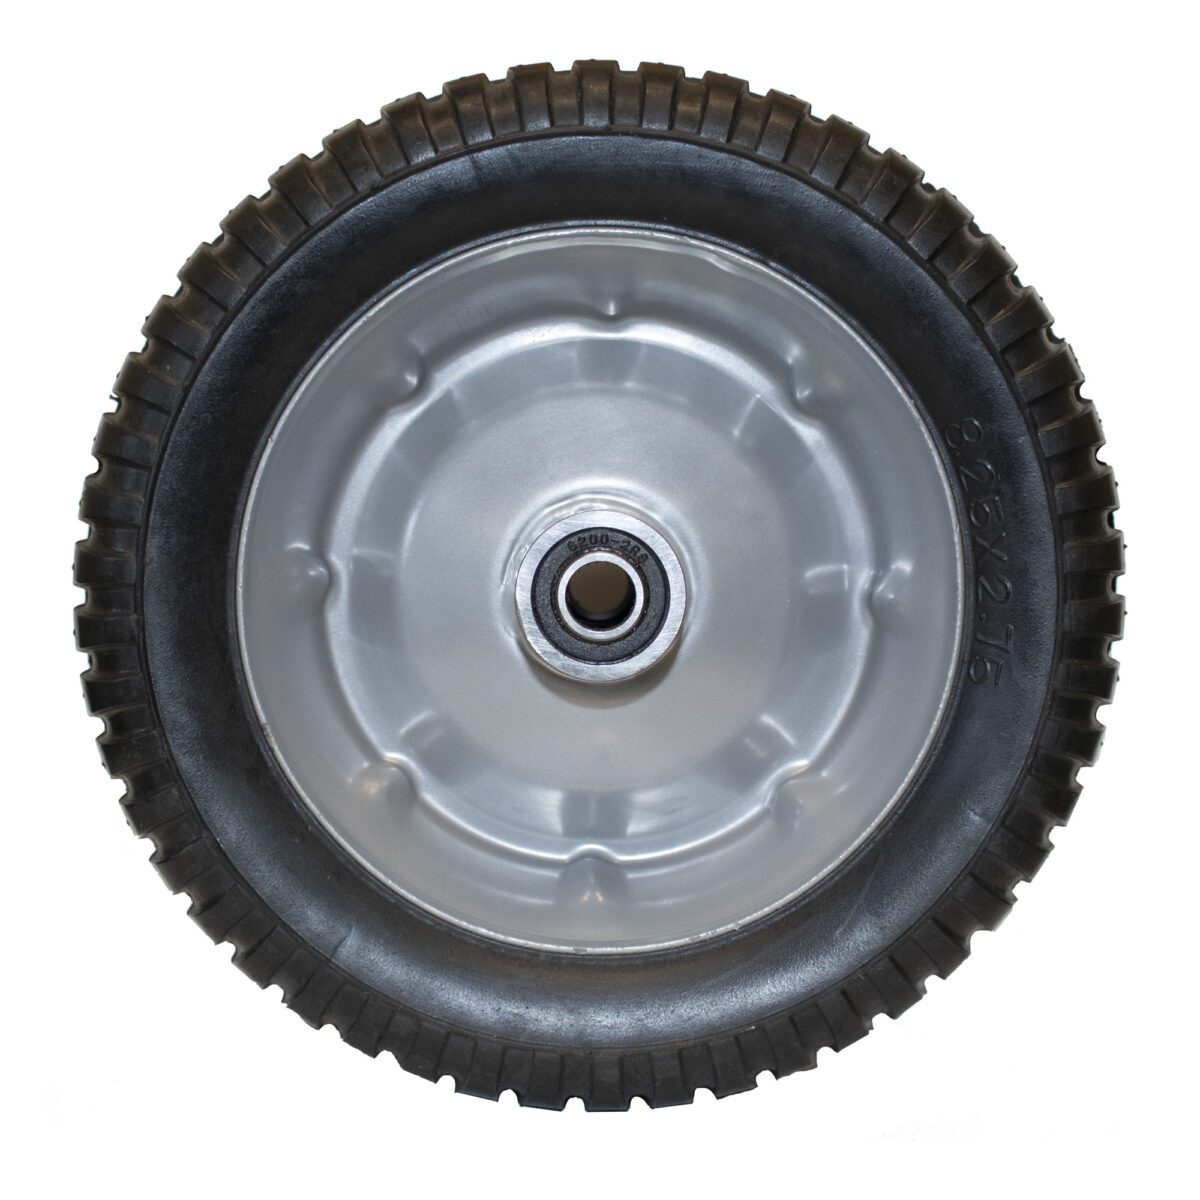 Billy Goat 169cc blower front tire